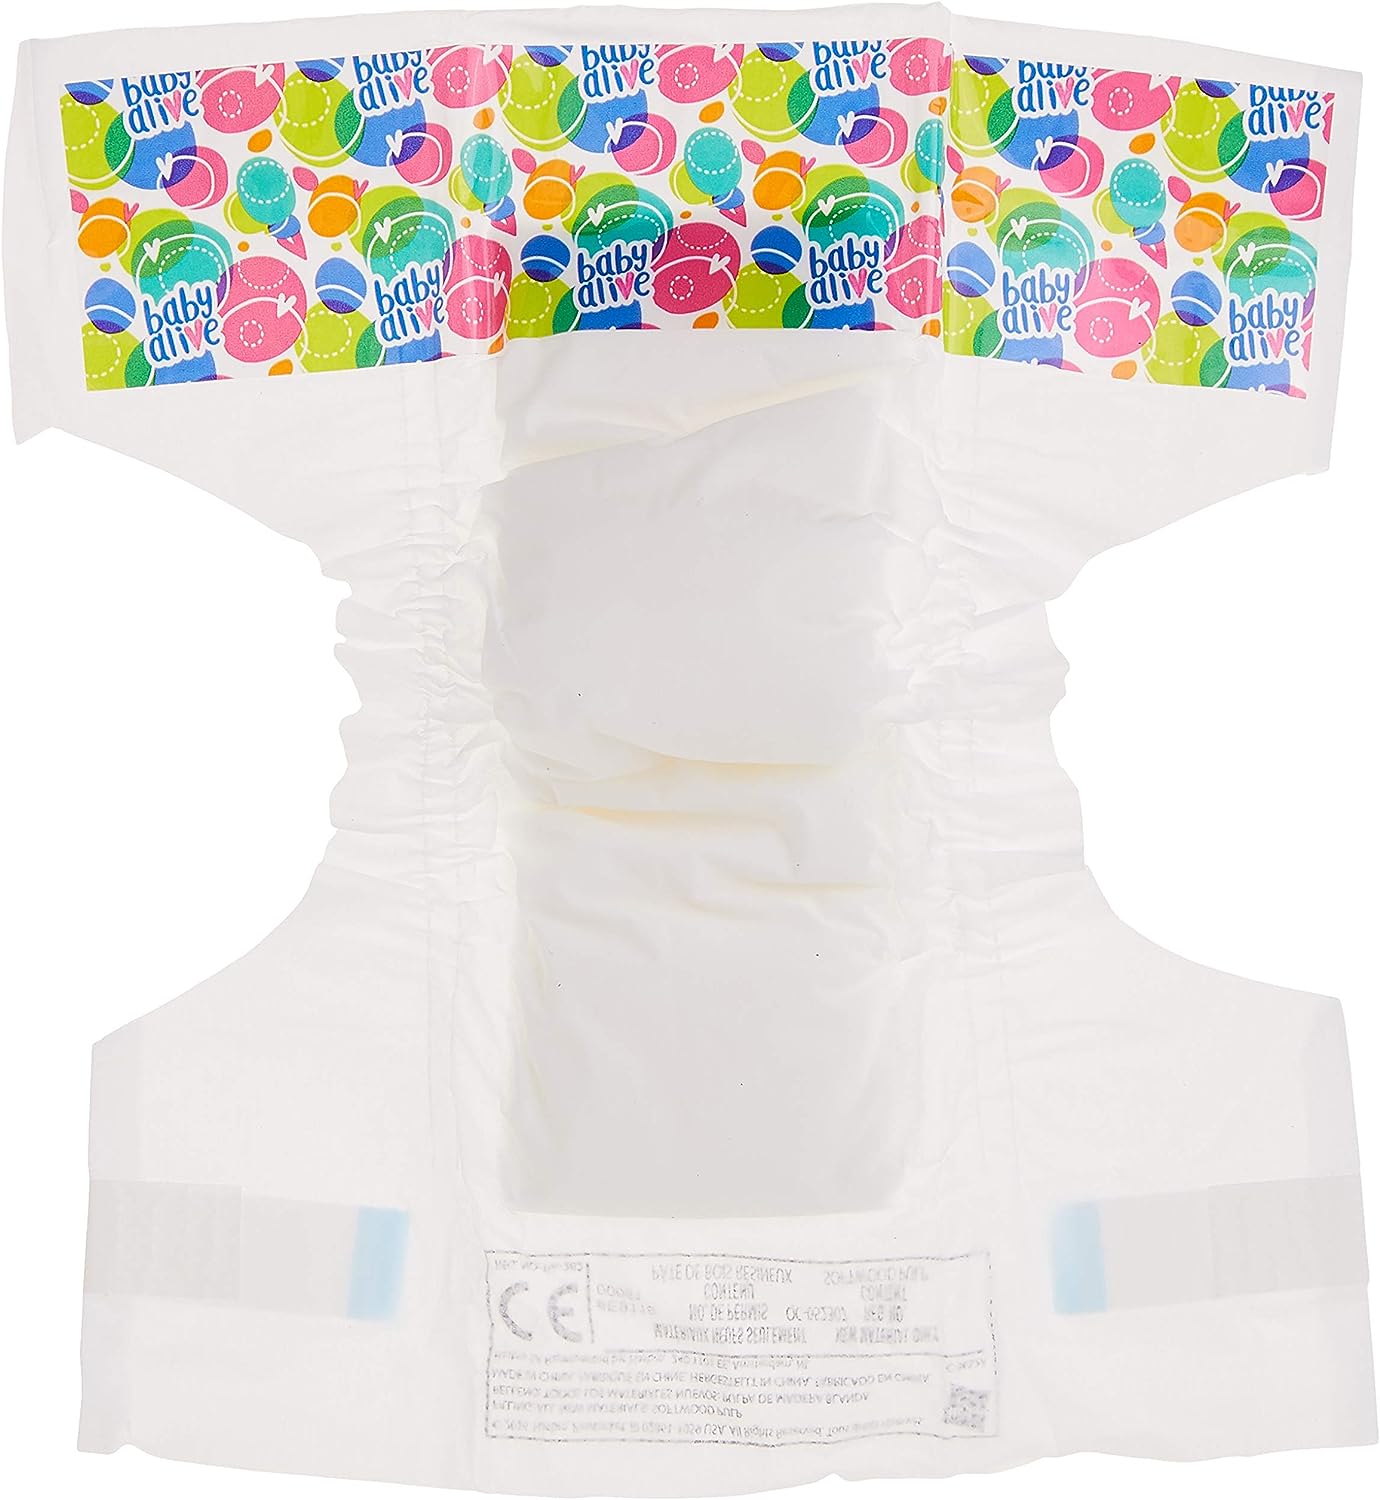 Baby Alive Diapers Pack (4 Pack)